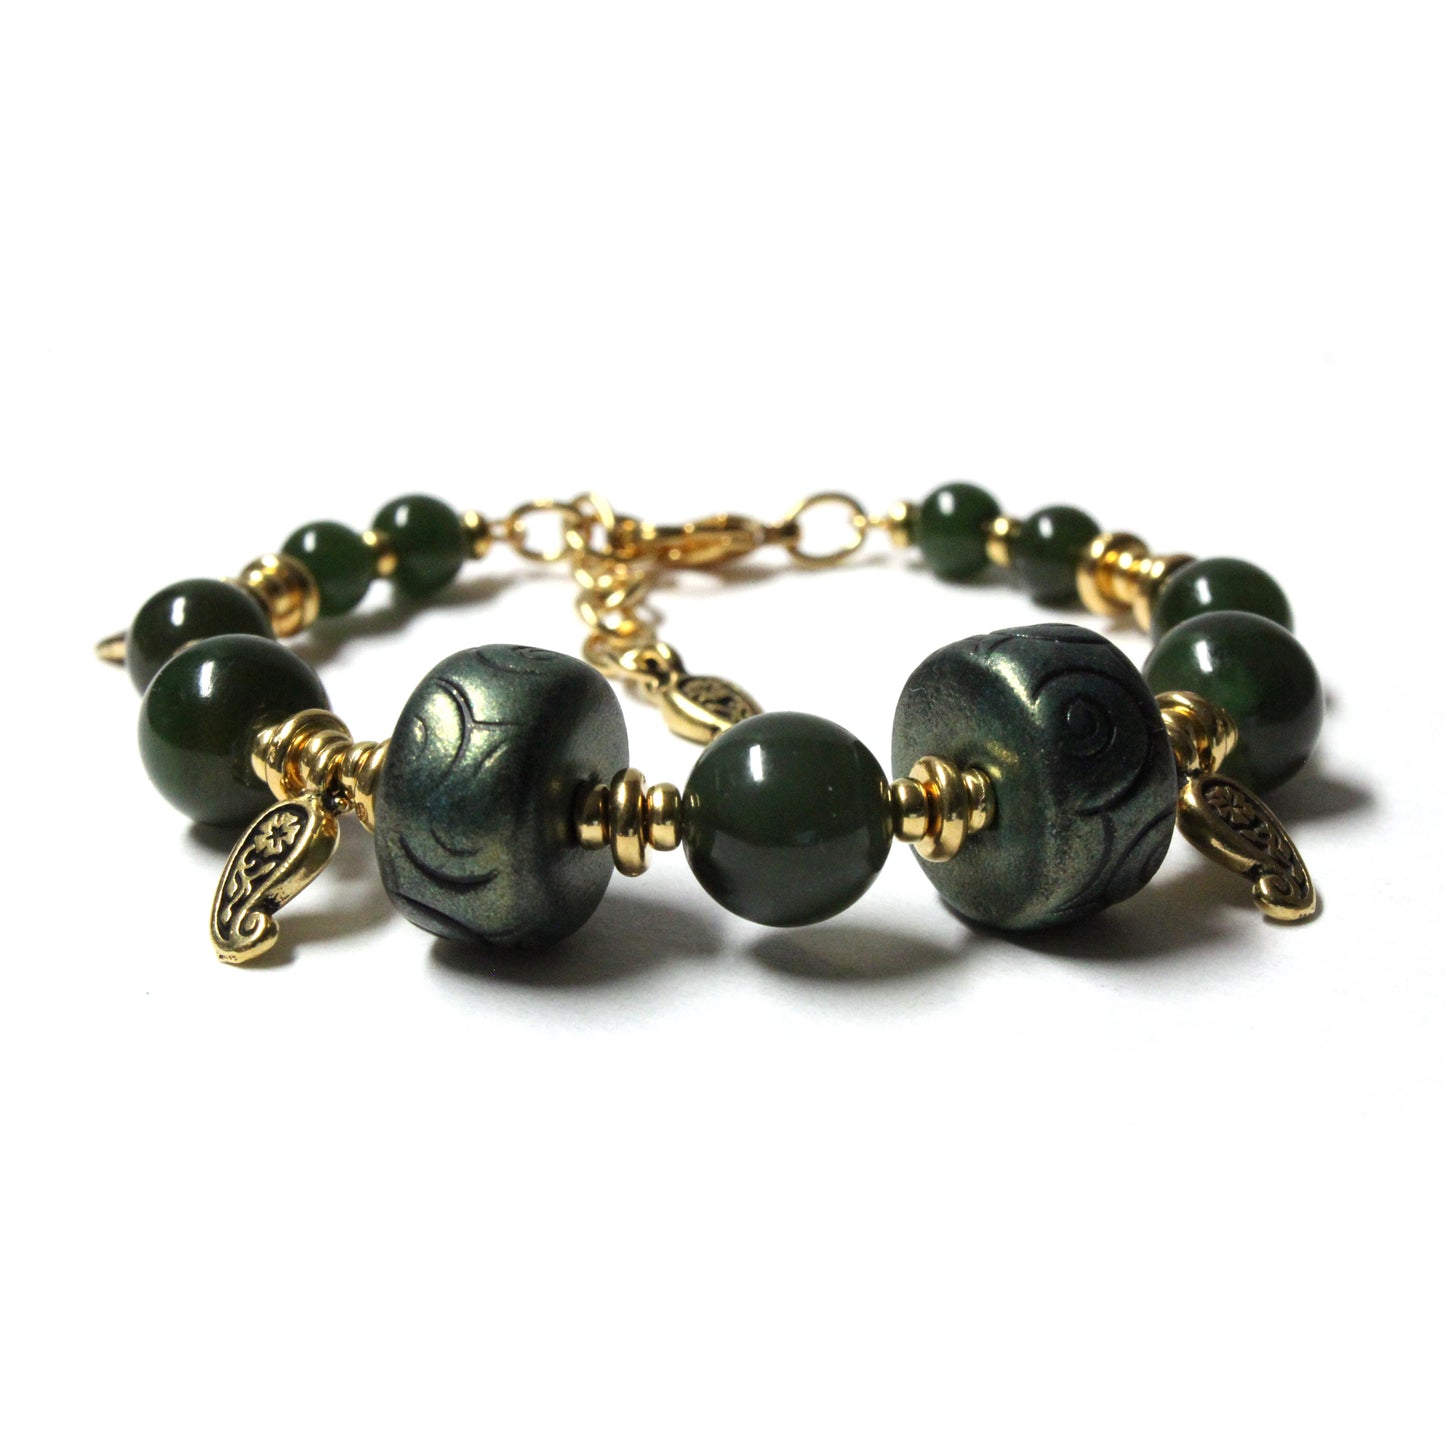 BC Jade Chunky Bracelet / 6 to 7 Inch wrist size / gold pewter beads and charms